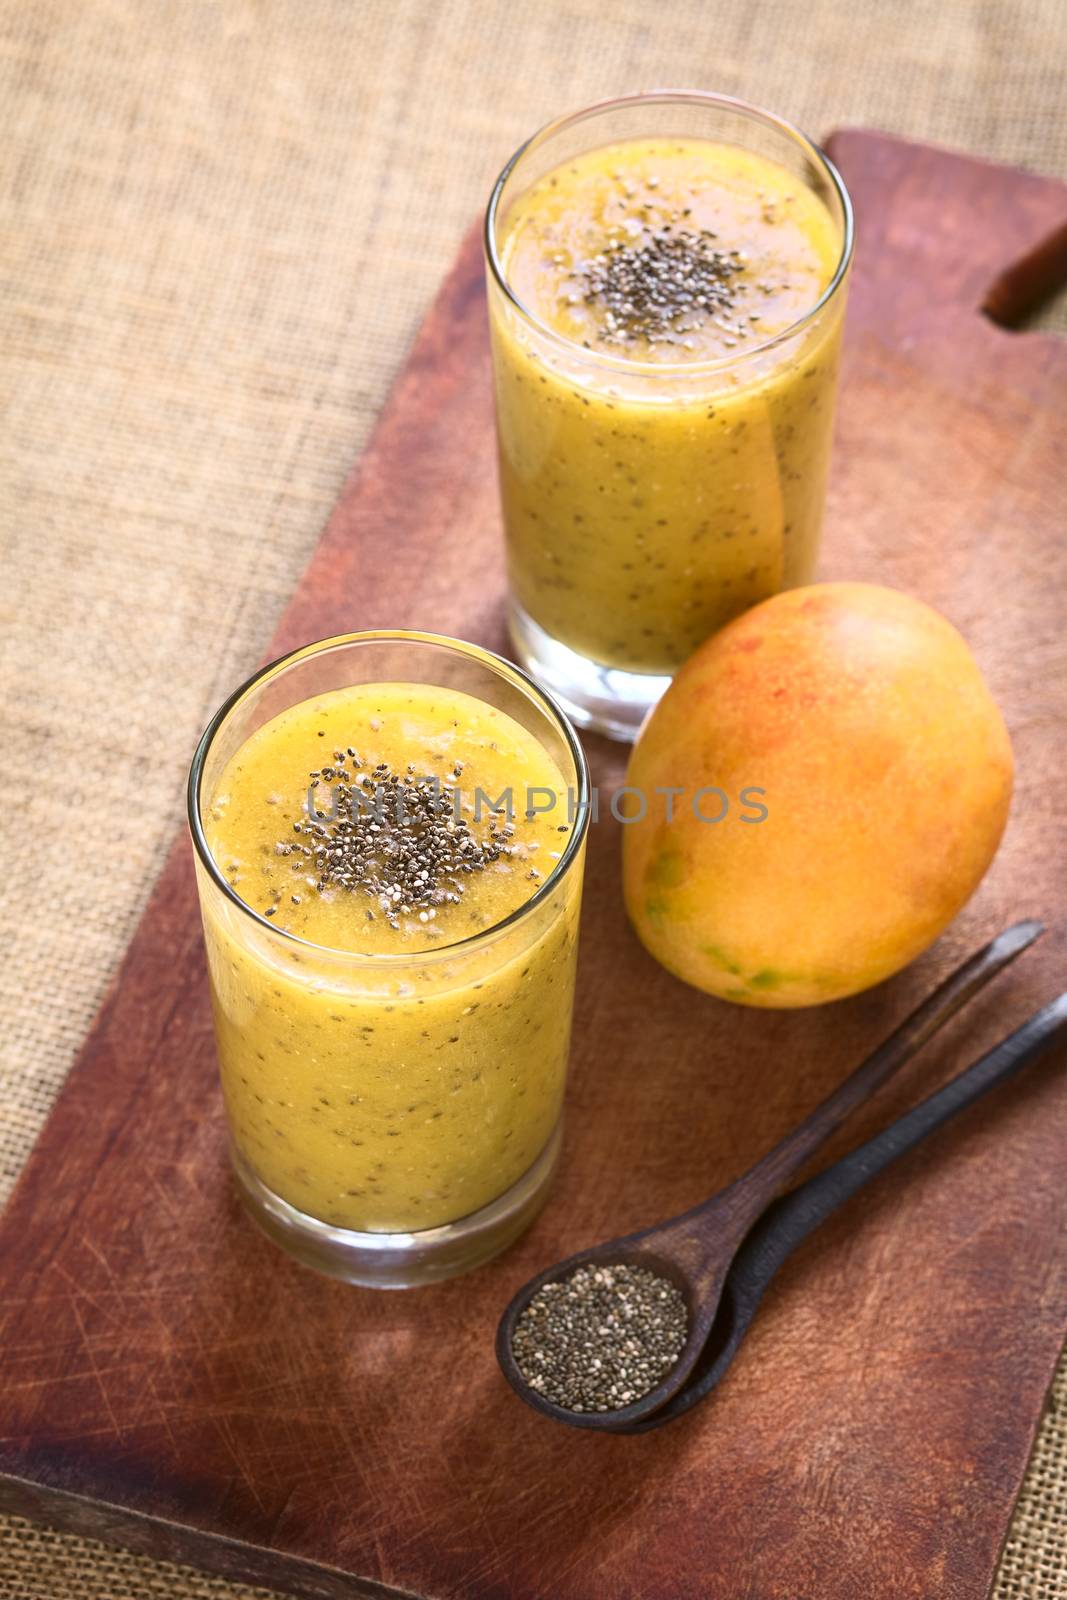 Chia seed (lat. Salvia hispanica) and mango juice photographed with natural light. Chia seeds are considered a superfood containing proteins, omega fats, minerals and antioxidants (Selective Focus, Focus on the chia seeds on the drink)